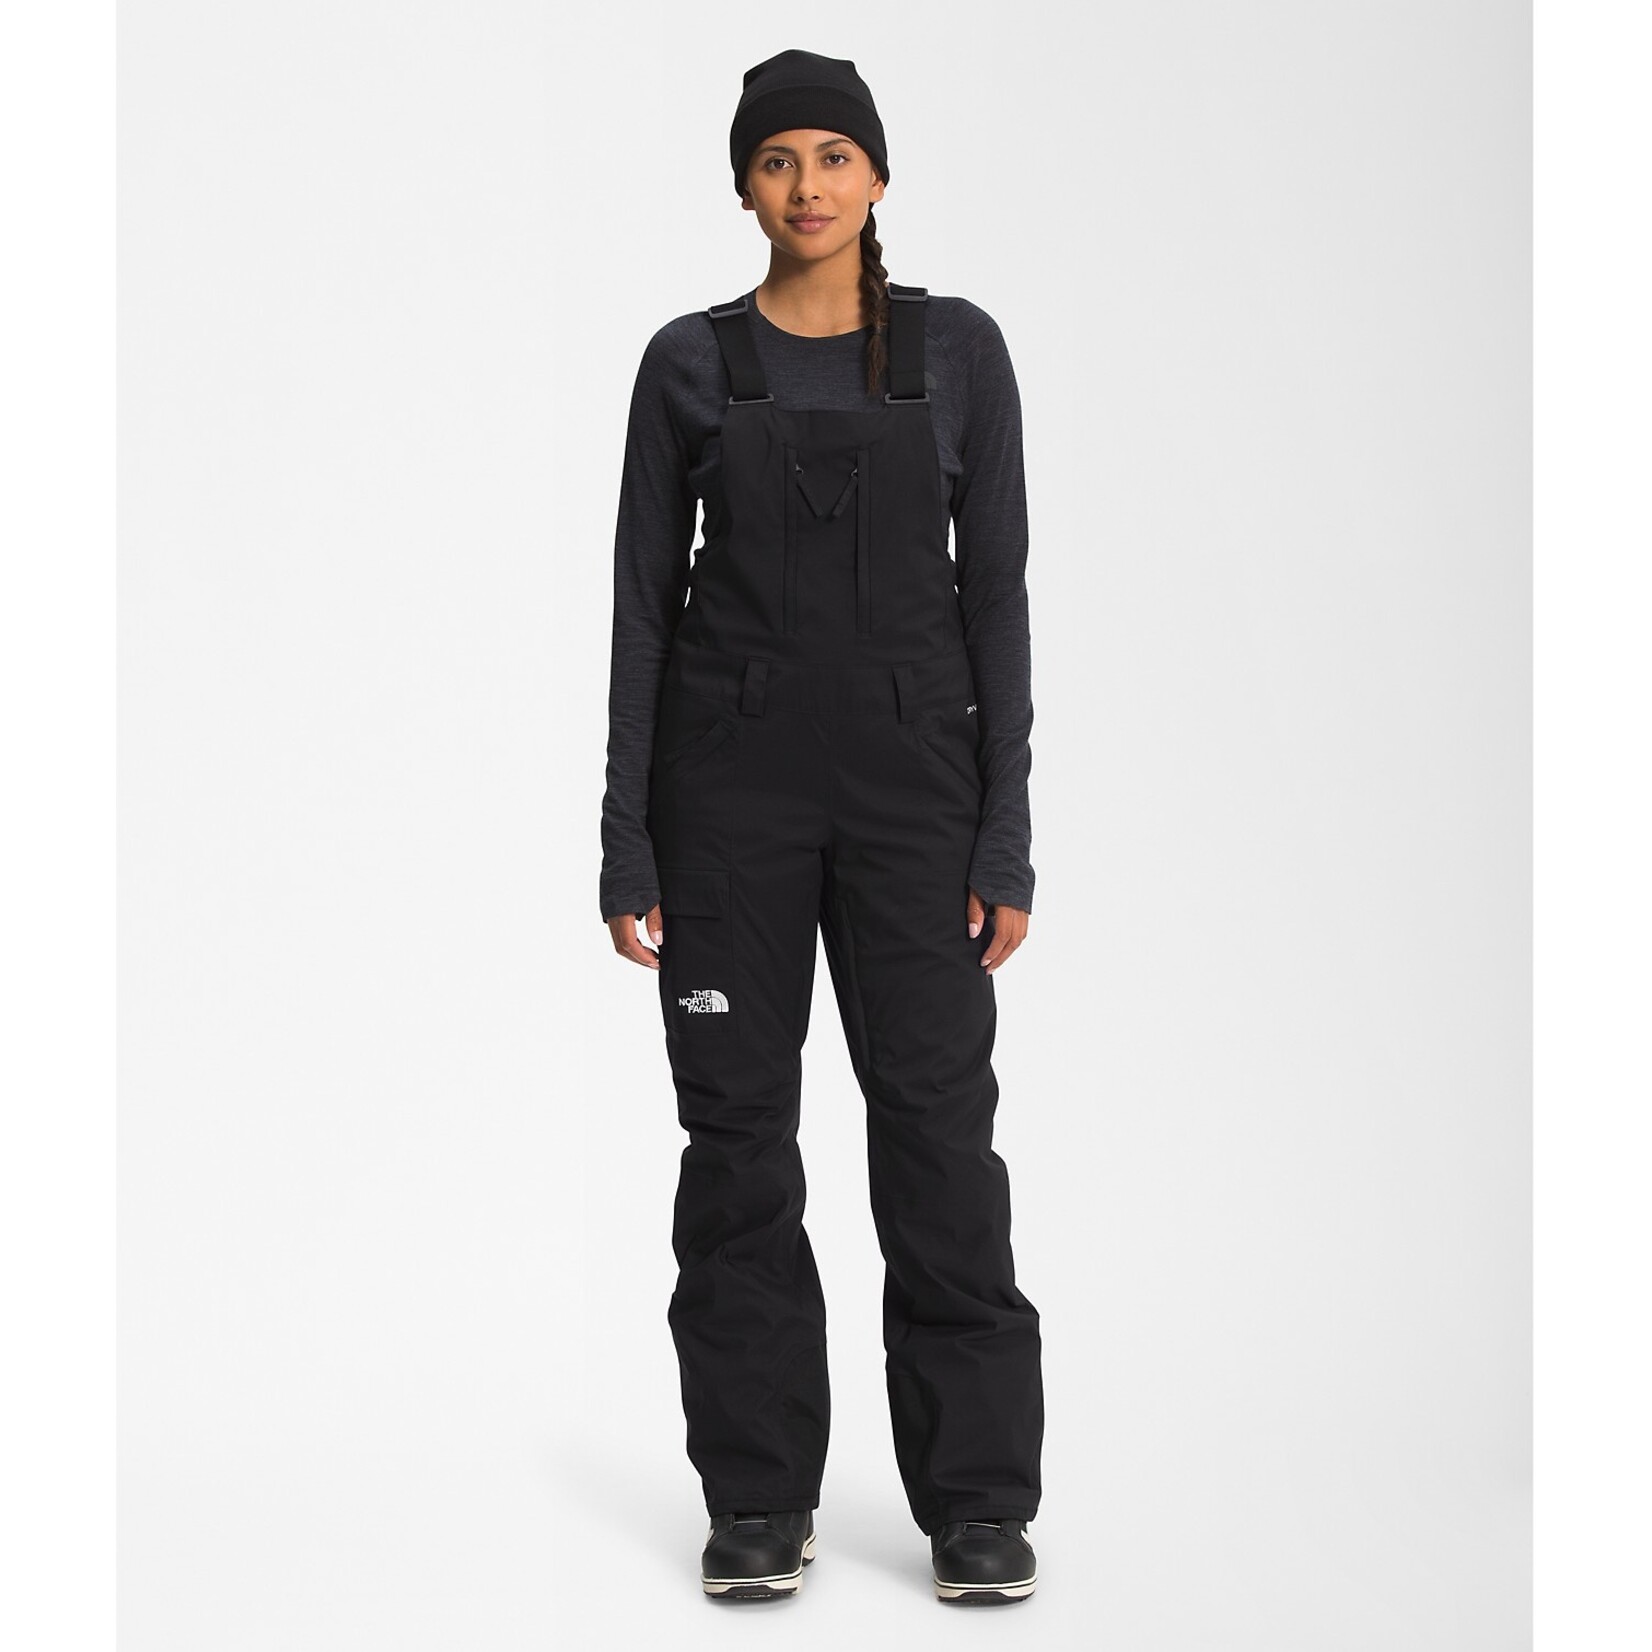 THE NORTH FACE Women's Freedom Insulated Bib